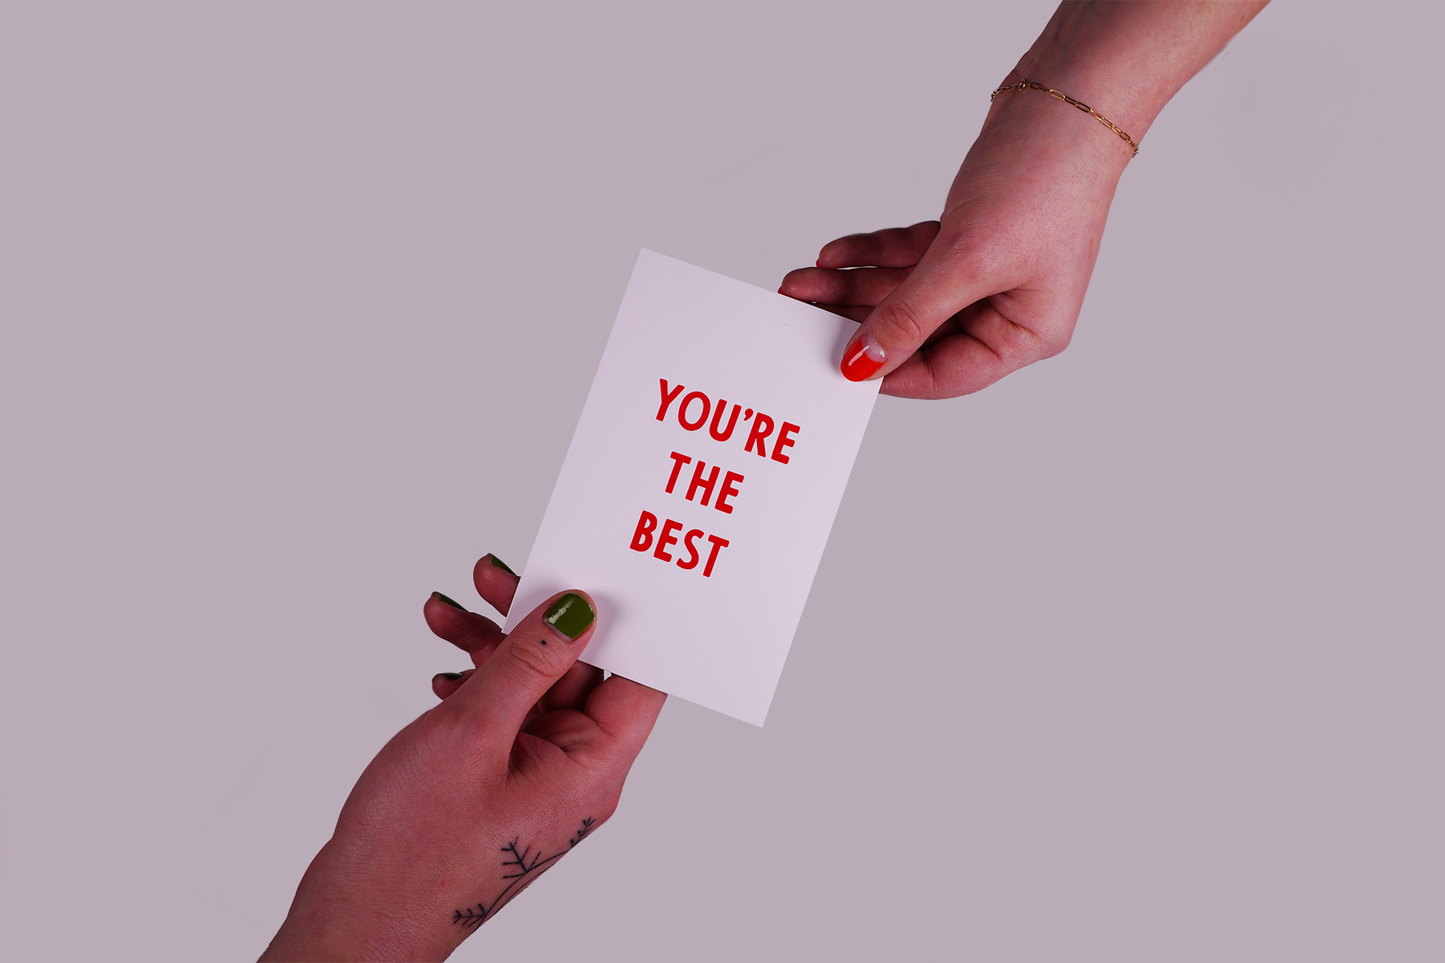 You're The Best Greeting Card & Matching Mini Pennant